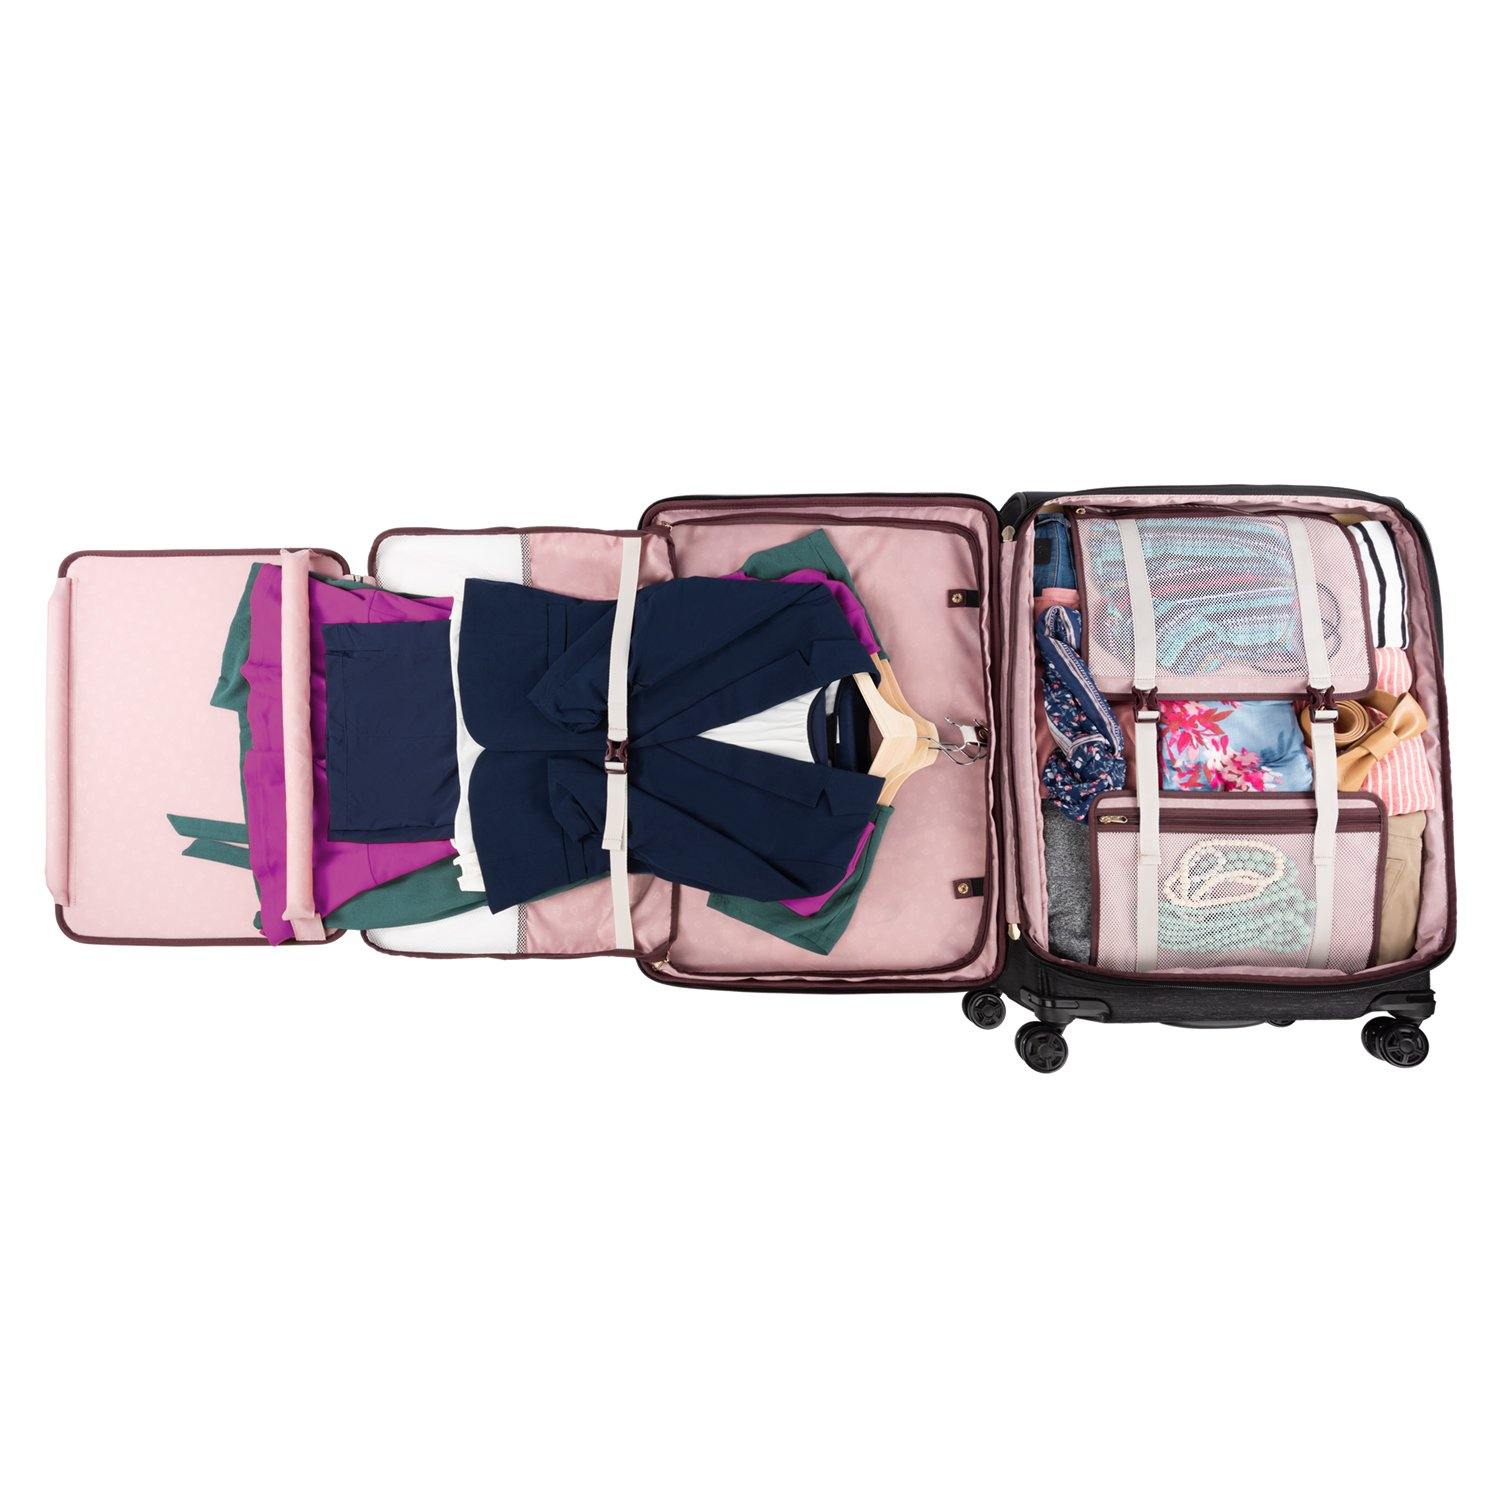 Travelpro Expandable Soft Side 29 Suitcase Alloy One Size at Hautelook